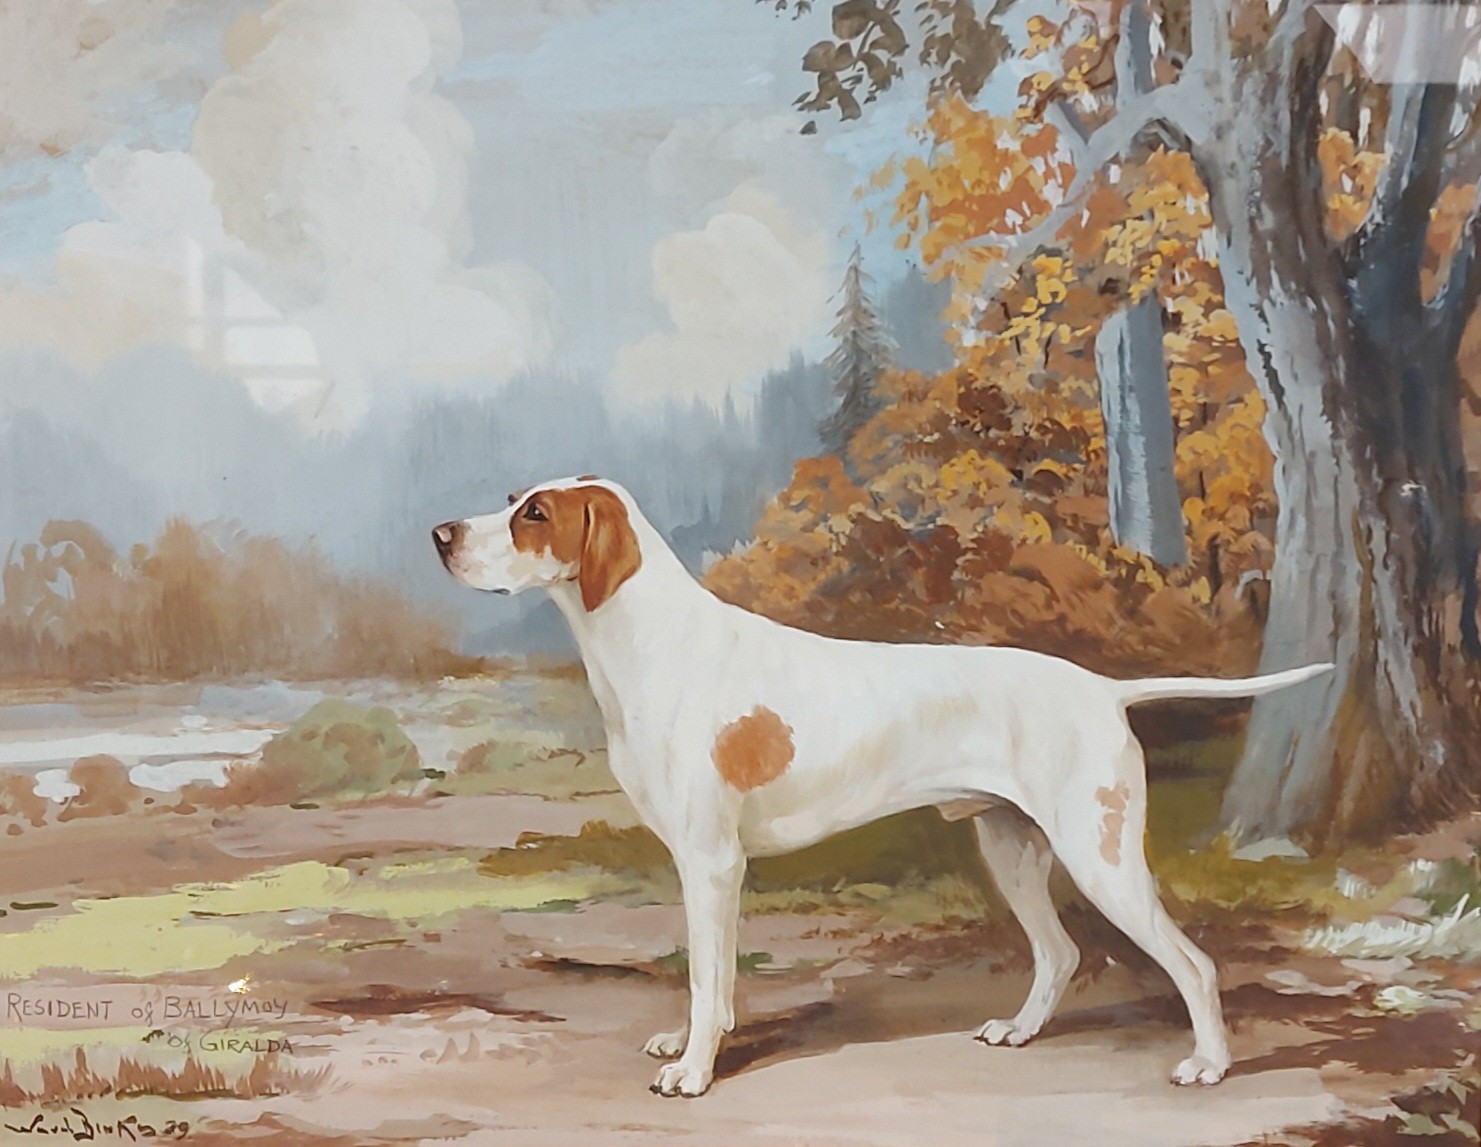 Reuben Ward Binks, study of a dog within a landscape, watercolour signed and titled Resident Of